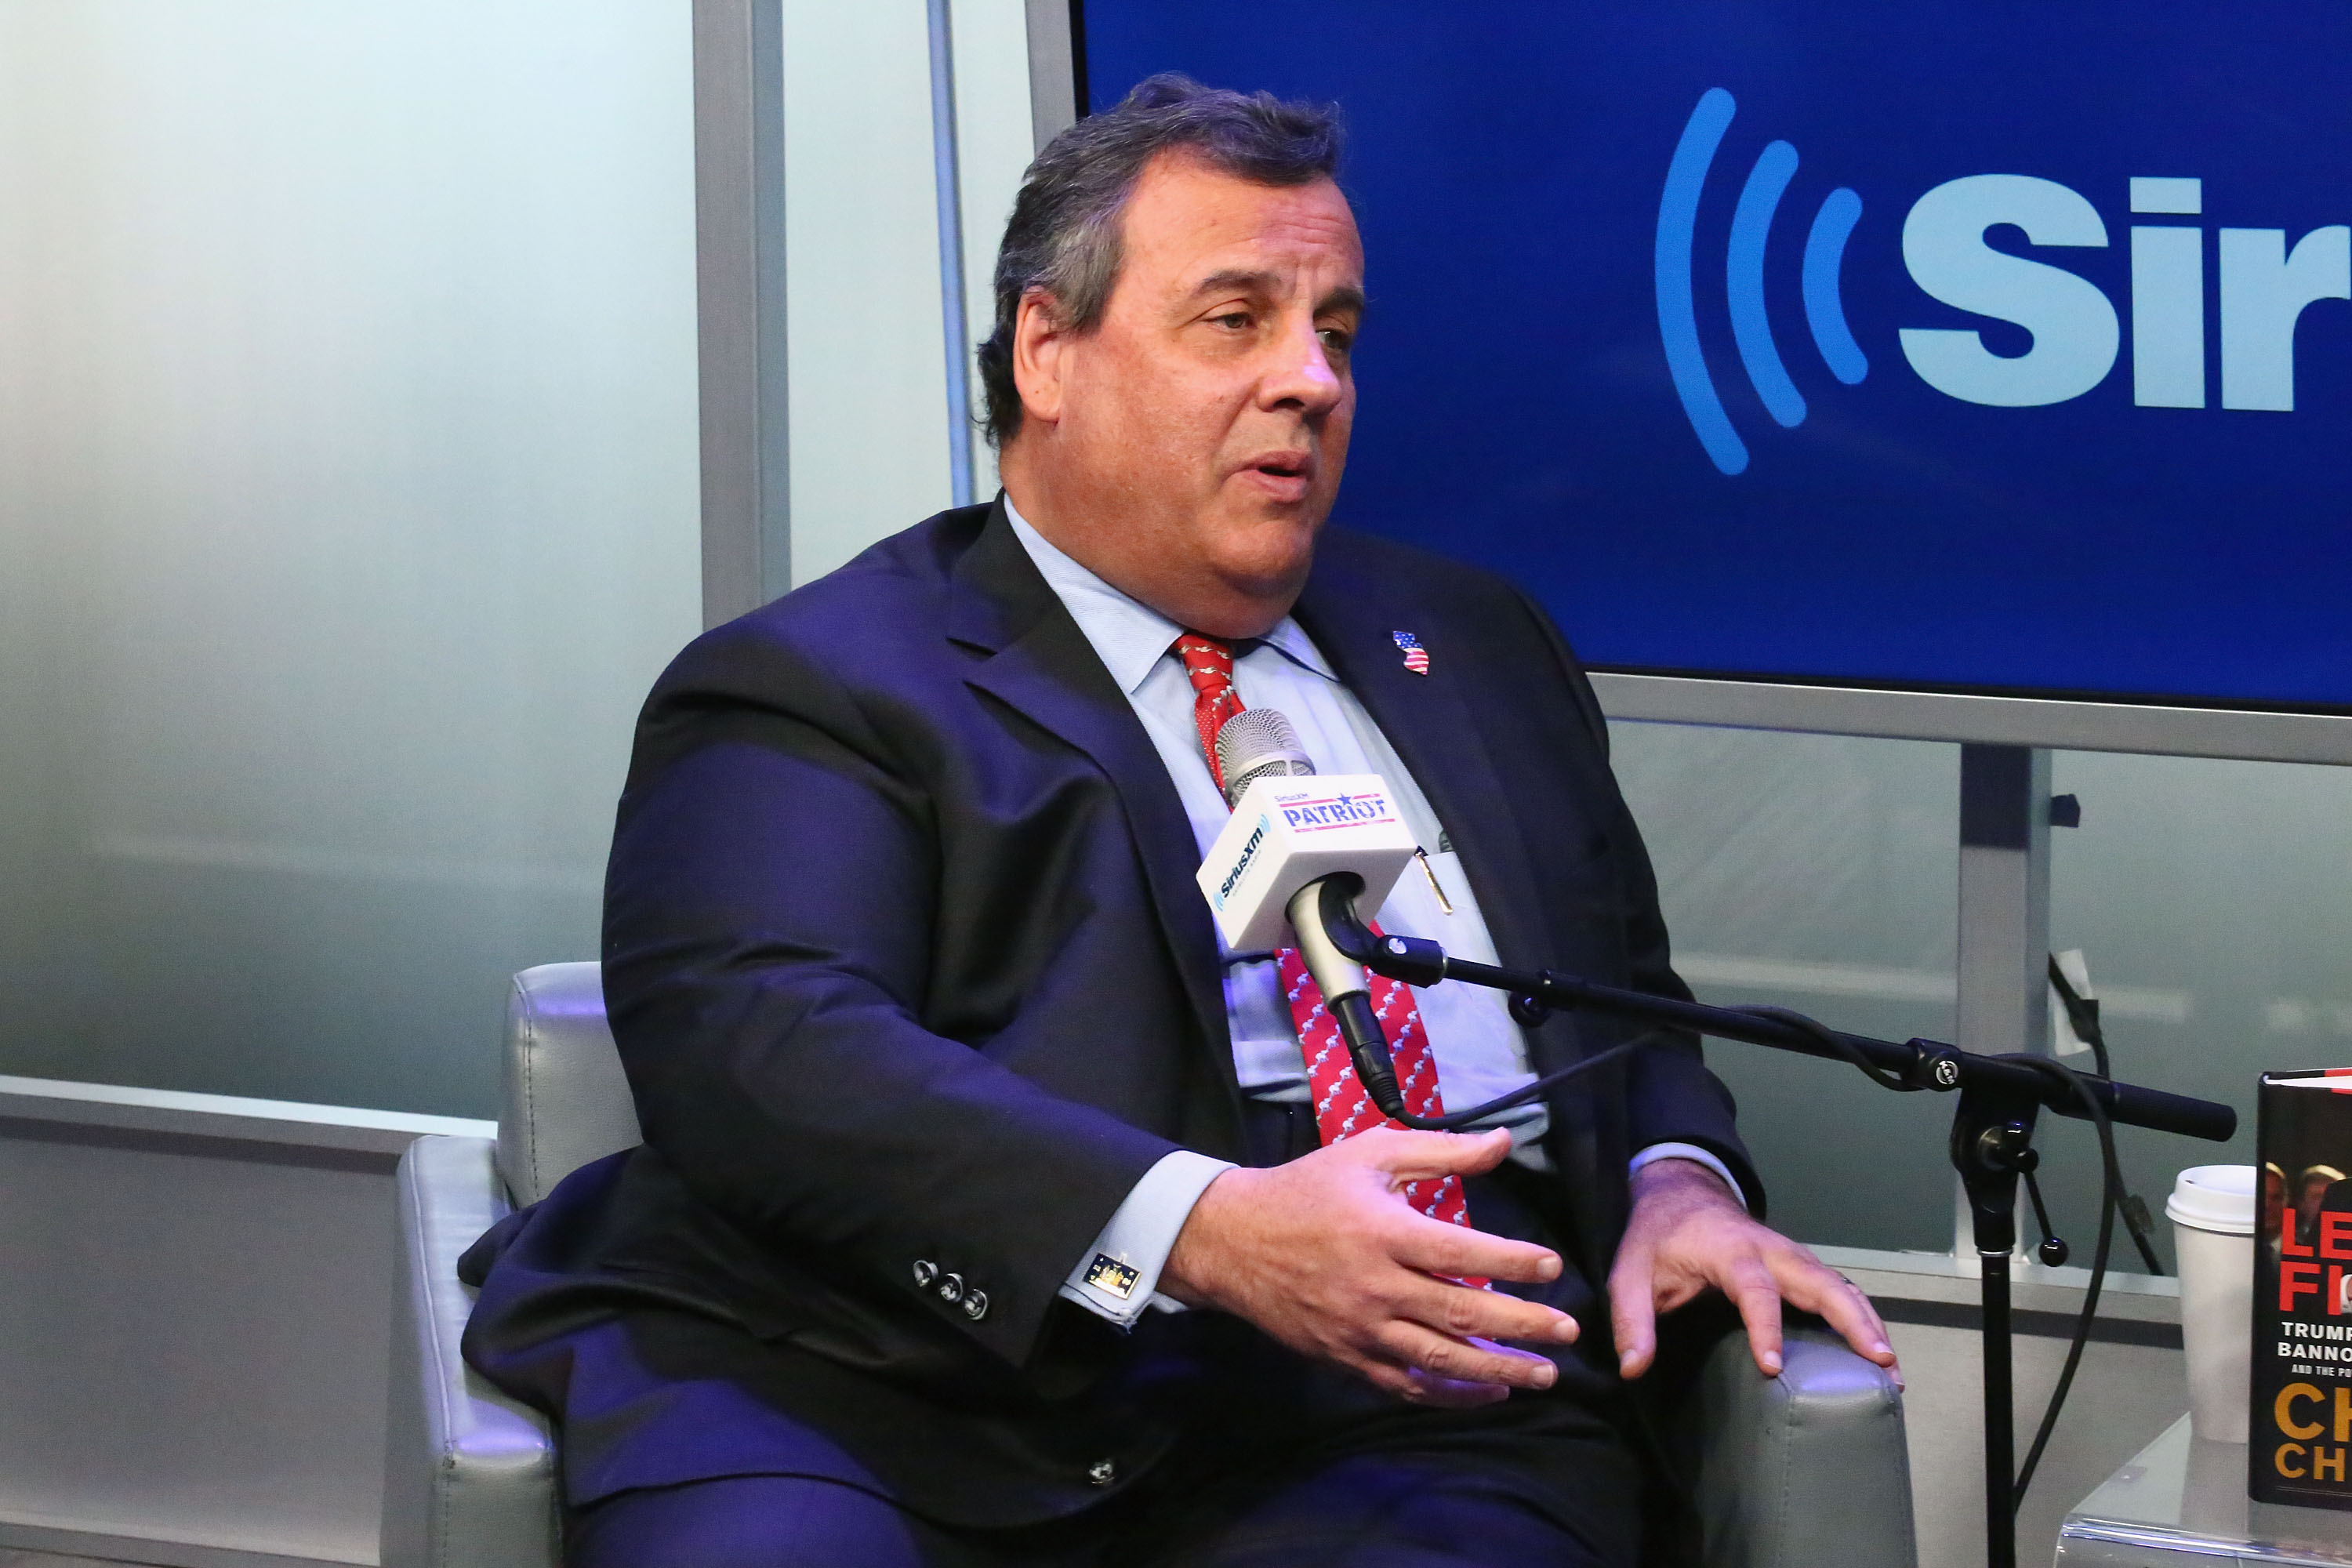 Chris Christie Declines to Say if He'd Support a Trump Run in 2024 as